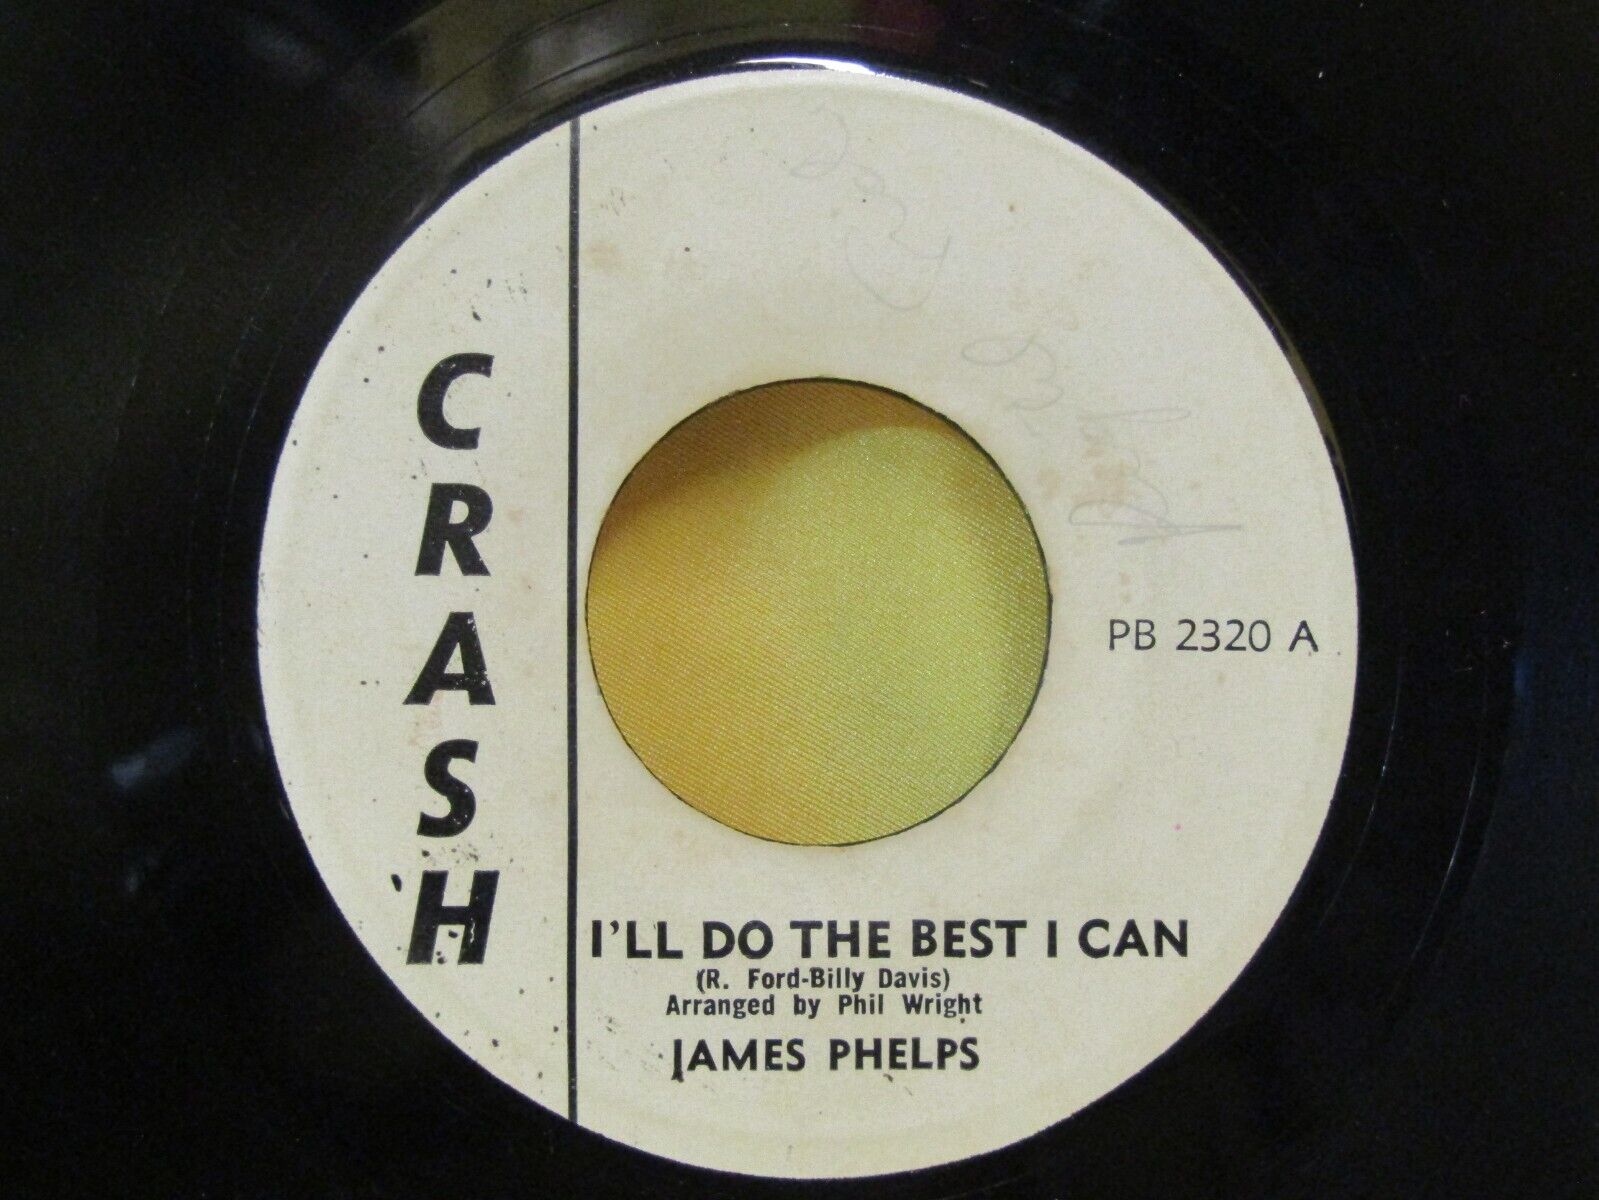 RARE NO. SOUL 45 on CRASH PB 2320 by JAMES PHELPS I\'LL DO THE BEST I CAN